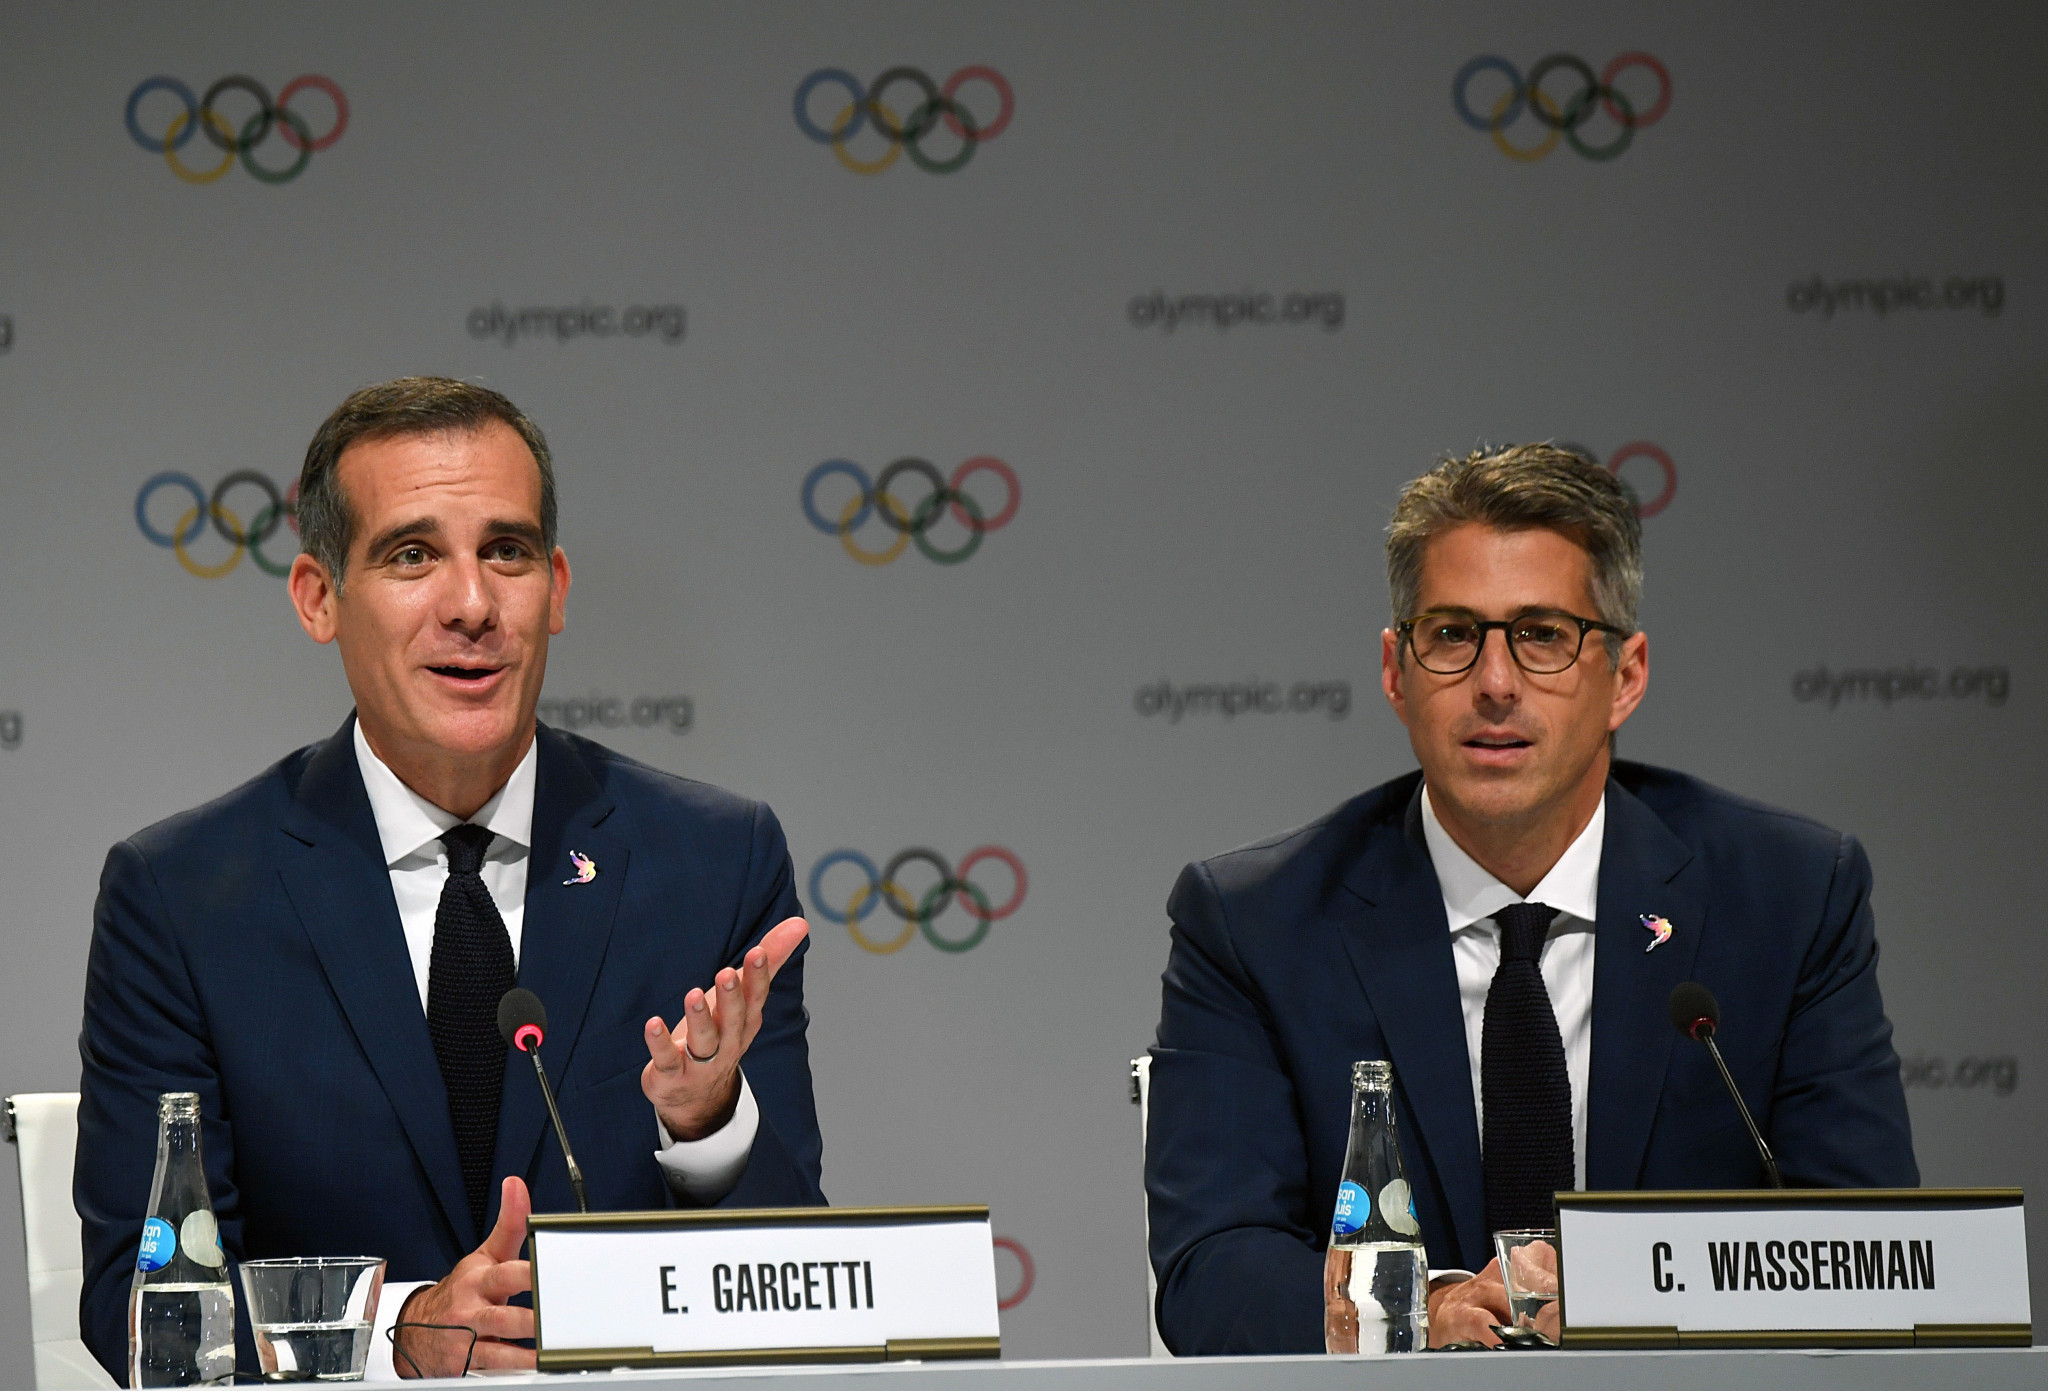 Casey Wasserman helped secure Los Angeles the 2028 Olympic Games alongside the city's Mayor Eric Garcetti ©Getty Images